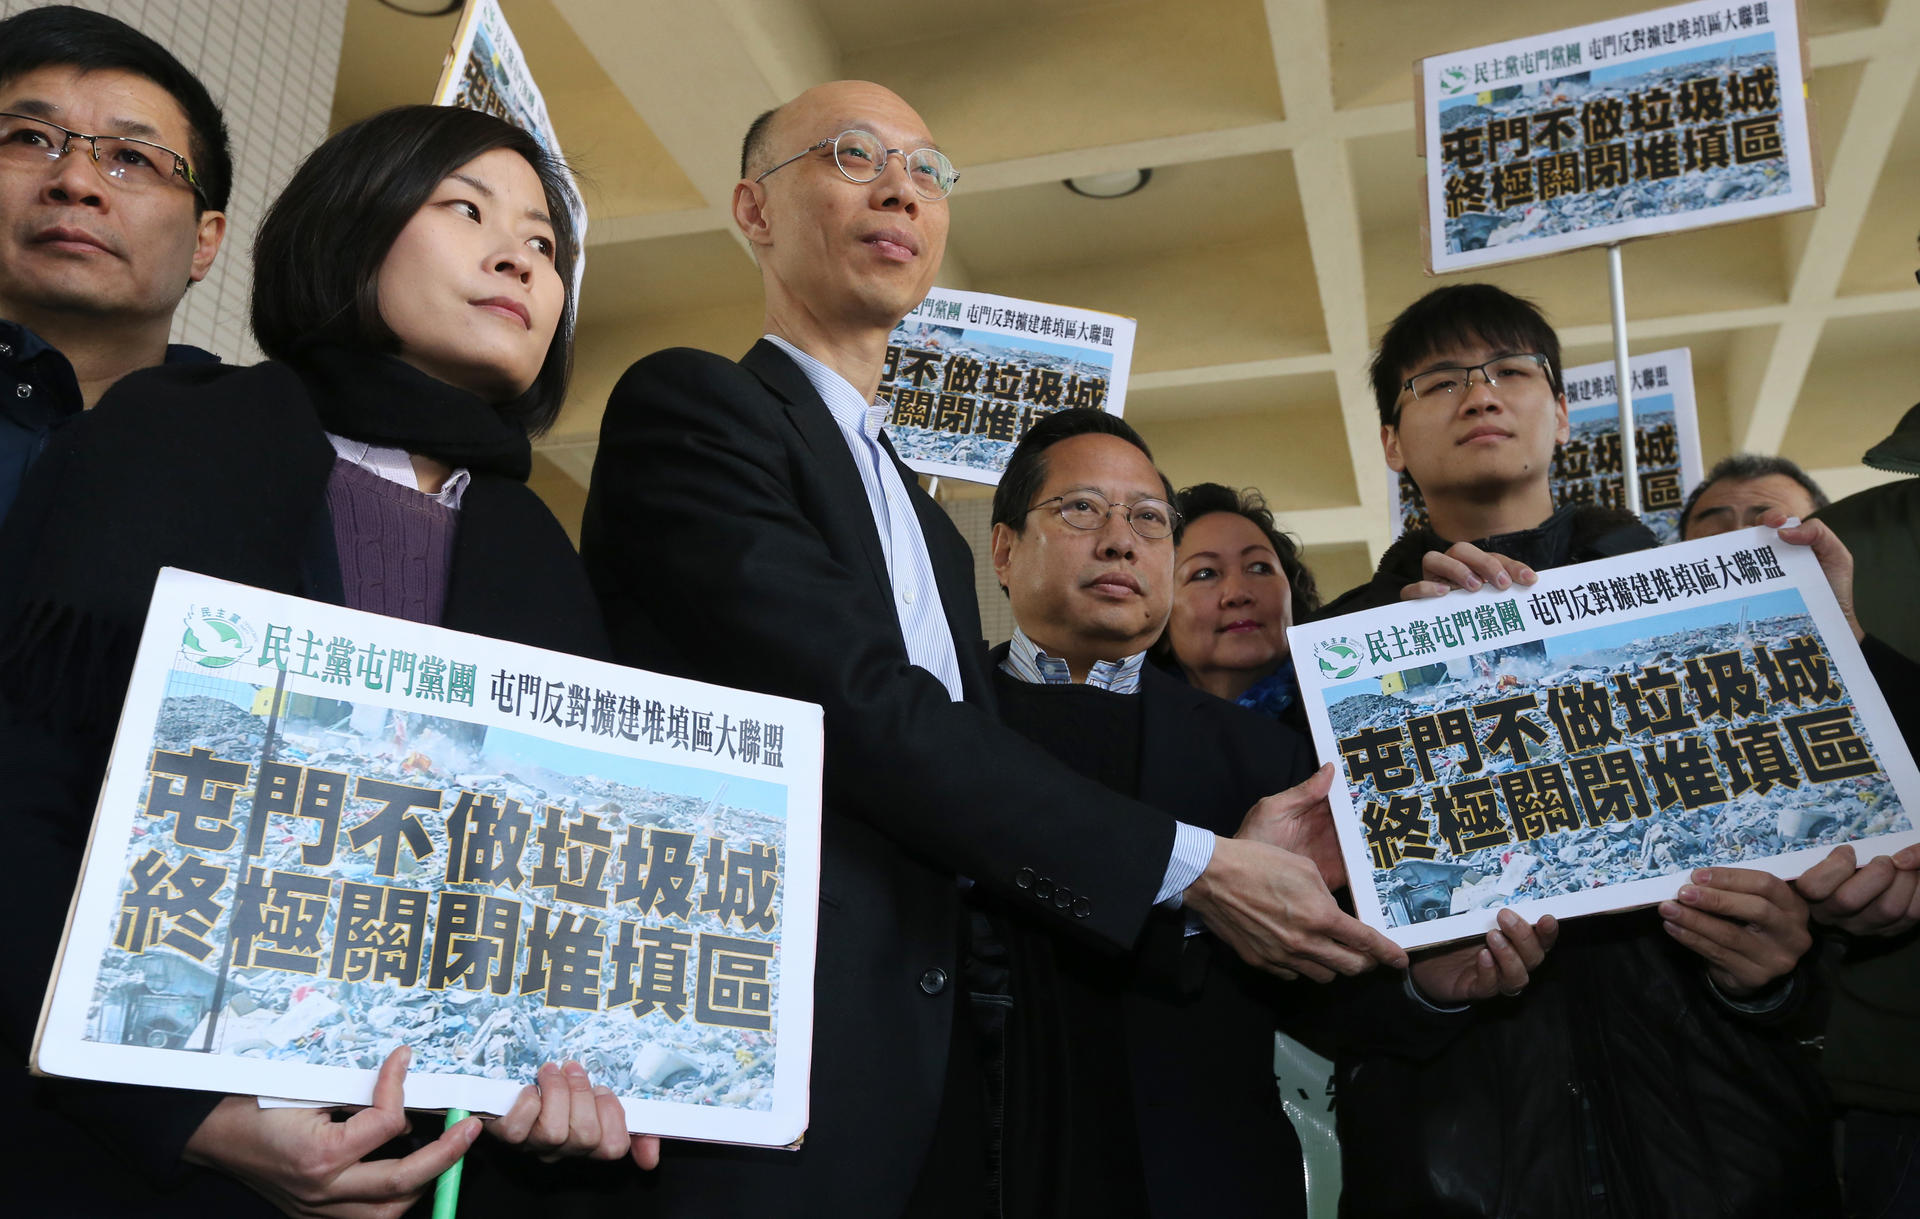 Secretary for the Environment Wong Kam-sing (third from left) receives petitions from lawmaker Albert Ho Chun-yan (to his left) and protesters. Photo: David Wong